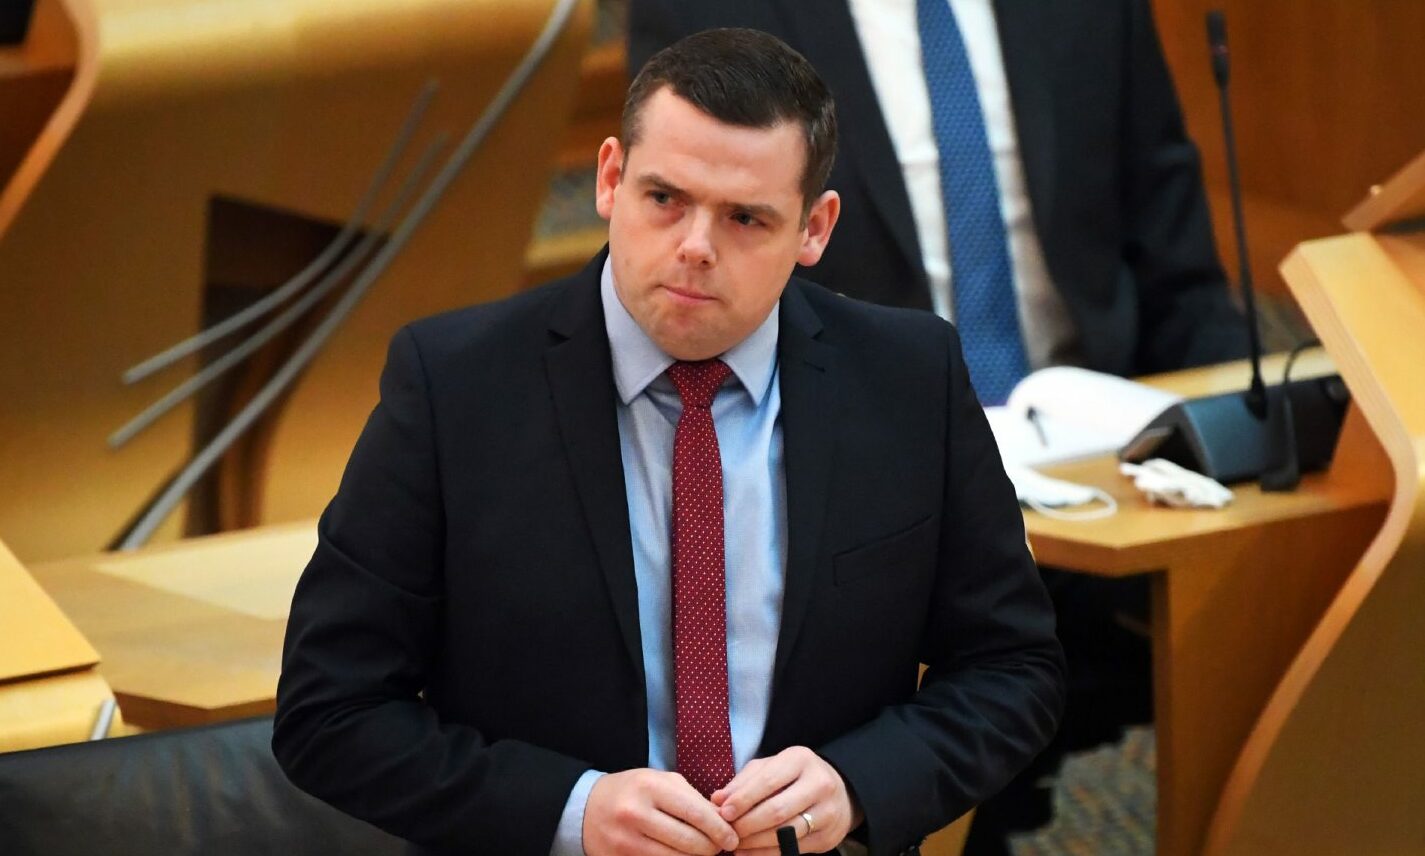 Scottish Tory leader Douglas Ross, who phoned his police offer wife while she was on duty to warn her of death threat against him.